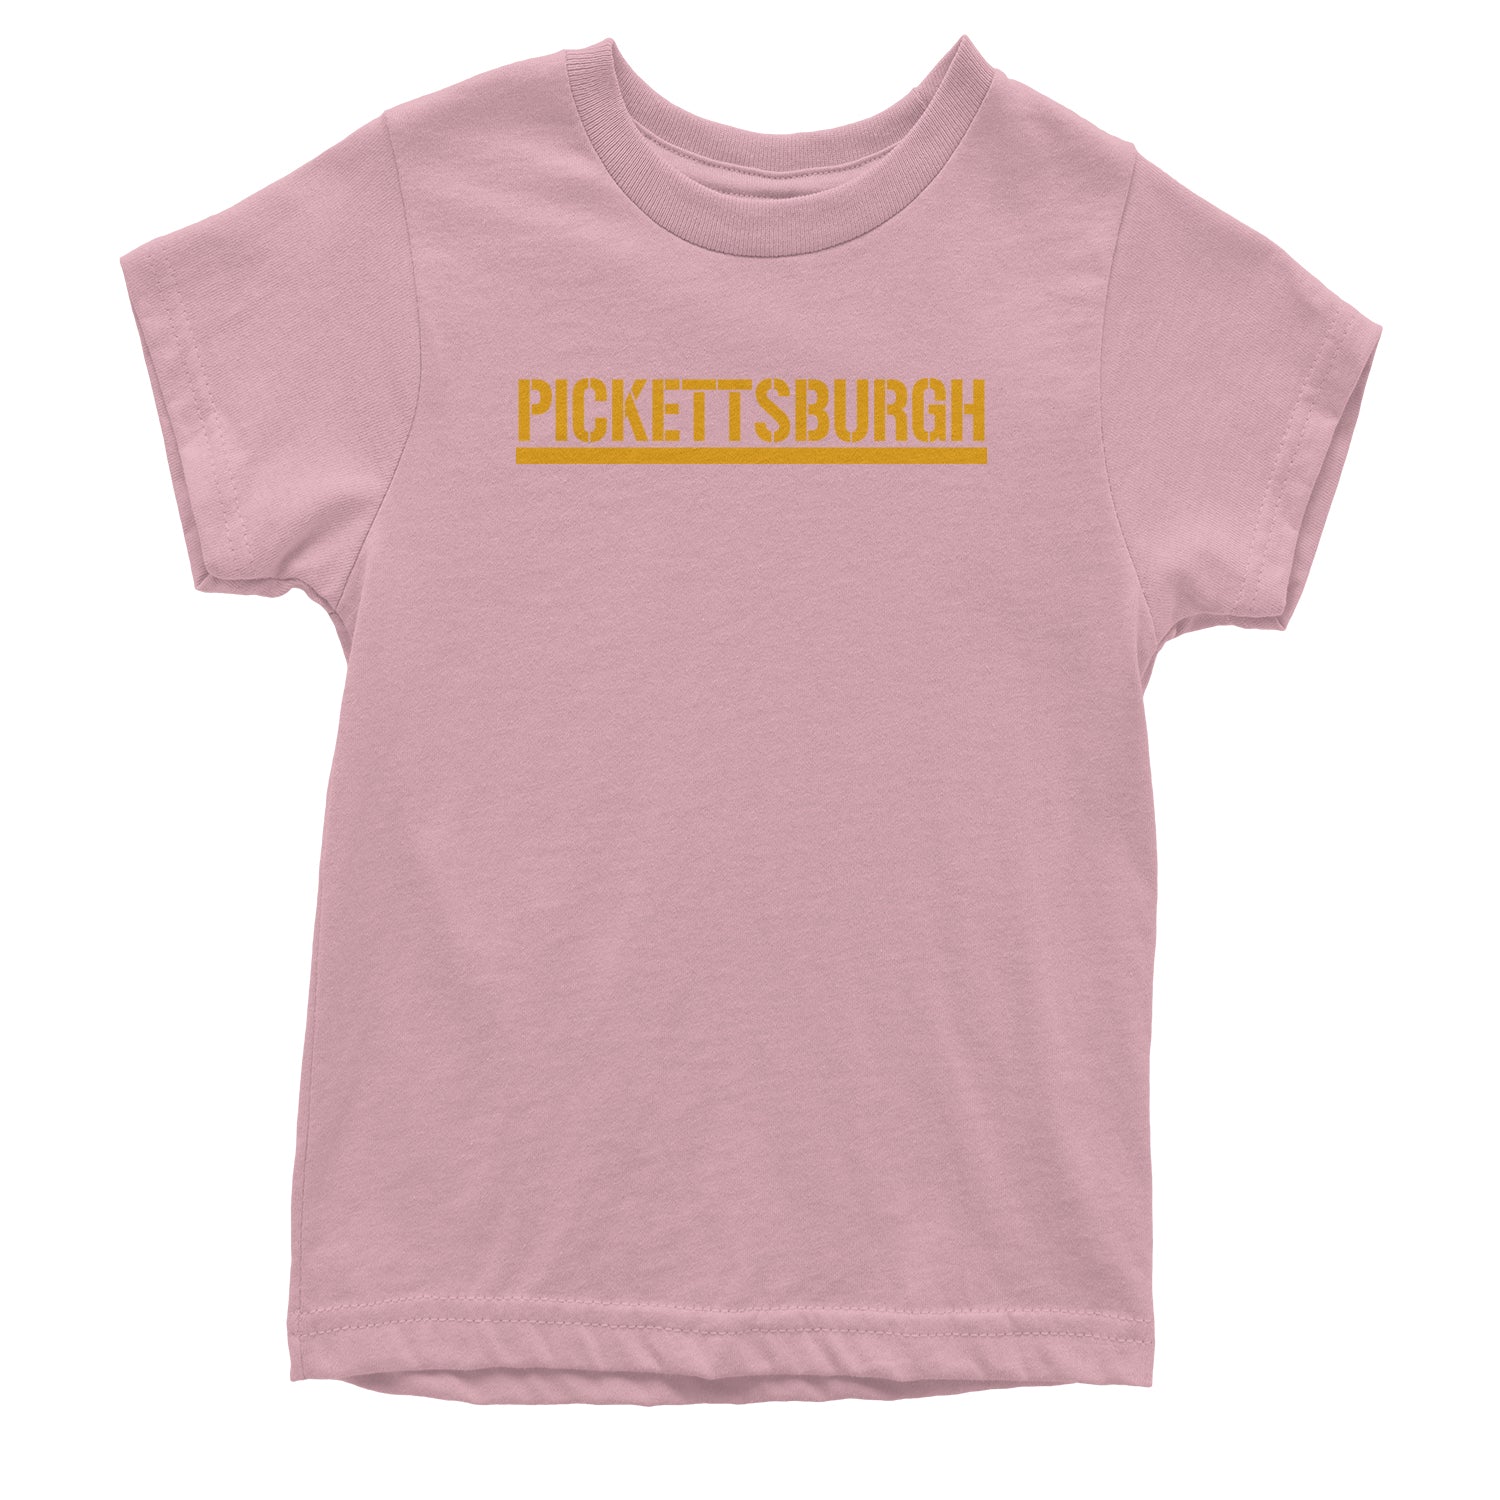 Pickettsburgh Pittsburgh Football Youth T-shirt apparel, city, clothing, curtain, football, iron, jersey, nation, pennsylvania, steel, steeler by Expression Tees